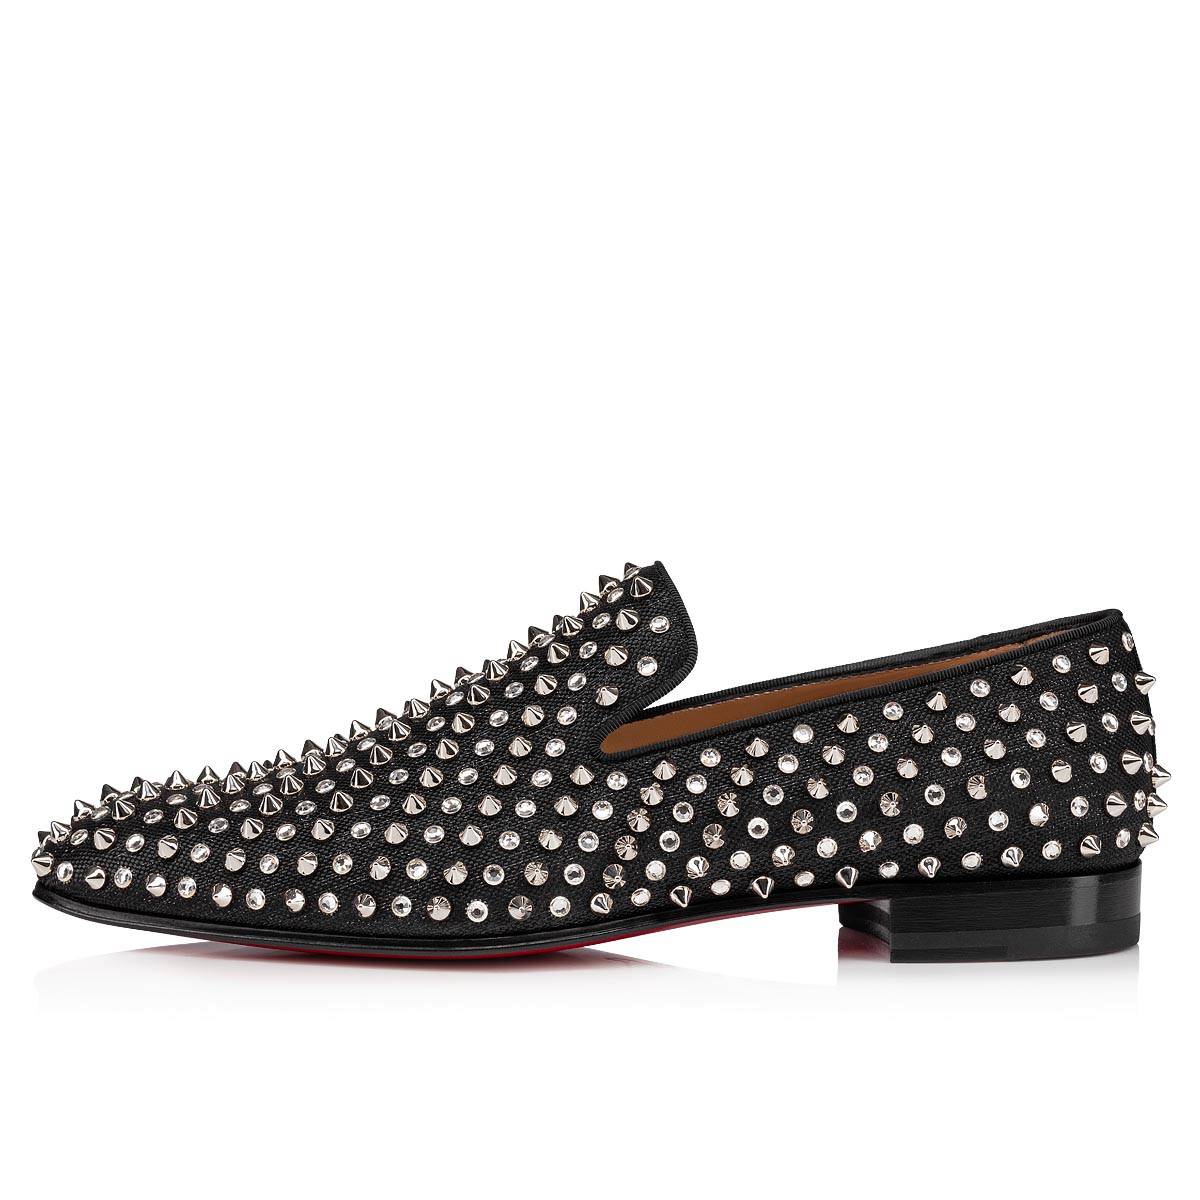 Red Bottoms Loafers 2020 Sale - Christian Louboutin Dandelion 1C1S Flat ...